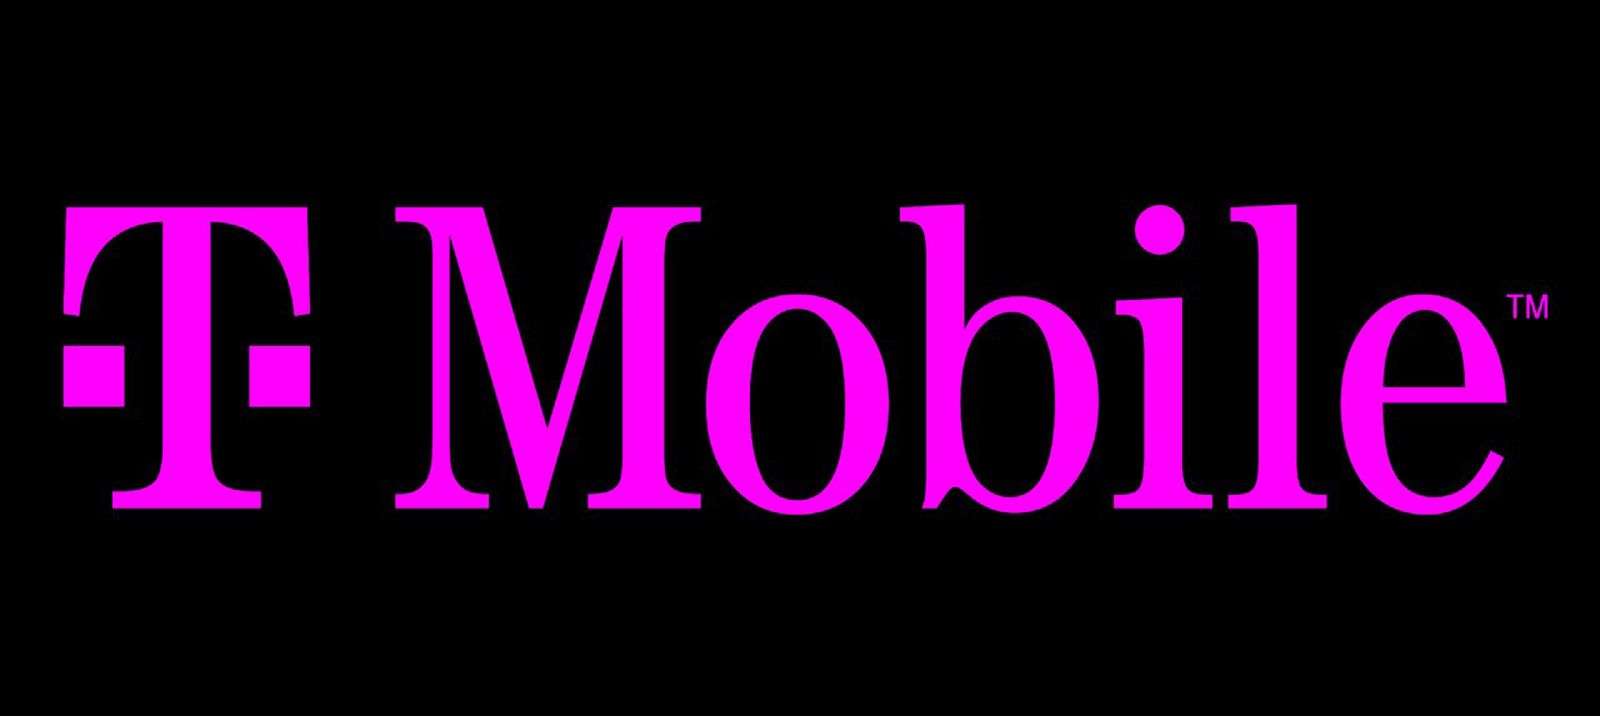 T-Mobile Was the Fastest U.S. Cellular Provider in Q1 2022